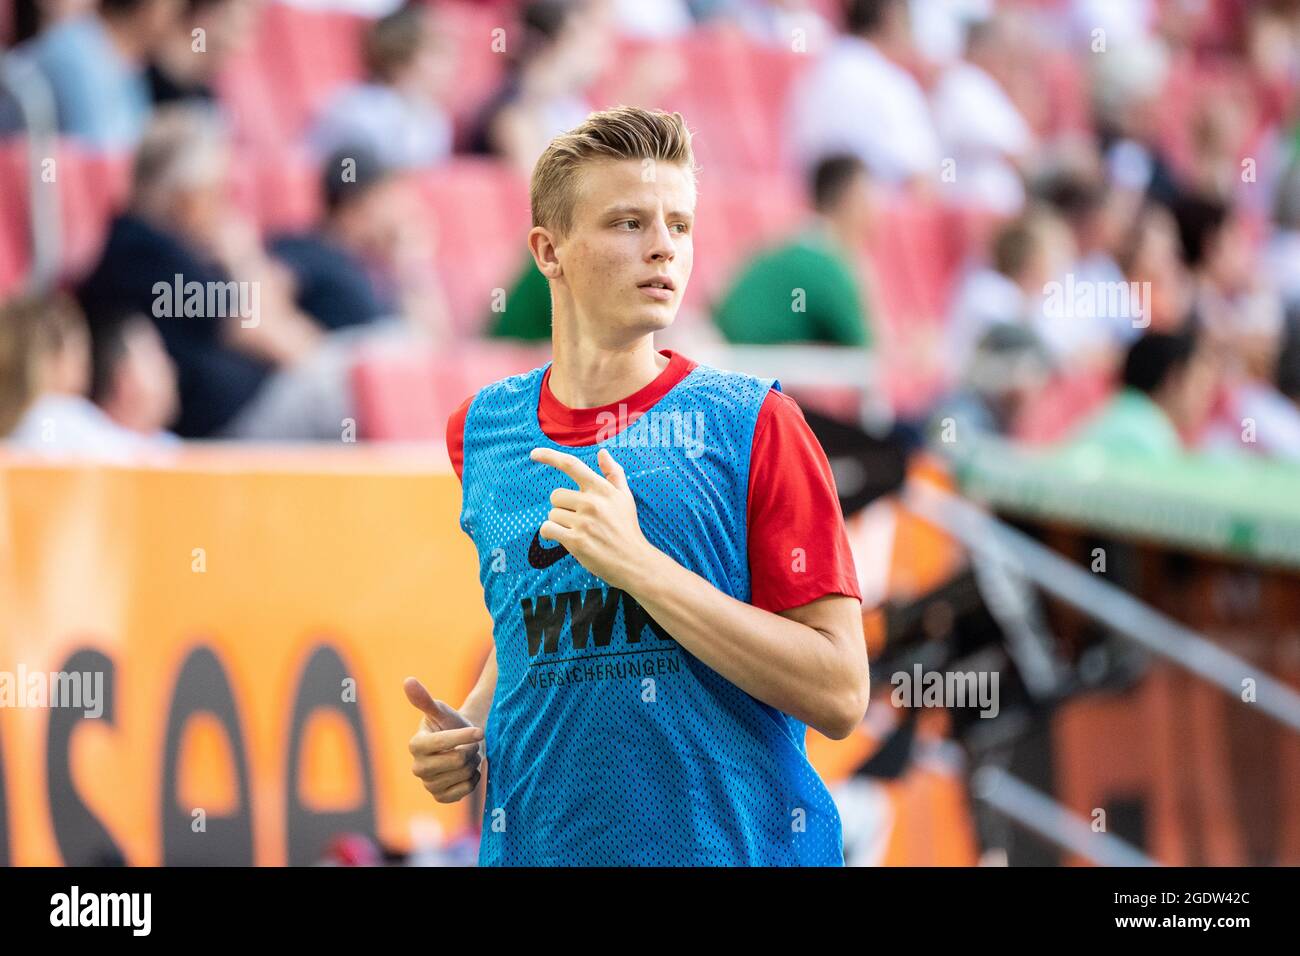 14 August 2021, Bavaria, Augsburg: Football: Bundesliga, FC Augsburg - TSG 1899 Hoffenheim, Matchday 1 at WWK Arena. Frederik Winther of Augsburg warms up on the sidelines. Photo: Matthias Balk/dpa - IMPORTANT NOTE: In accordance with the regulations of the DFL Deutsche Fußball Liga and/or the DFB Deutscher Fußball-Bund, it is prohibited to use or have used photographs taken in the stadium and/or of the match in the form of sequence pictures and/or video-like photo series. Stock Photo